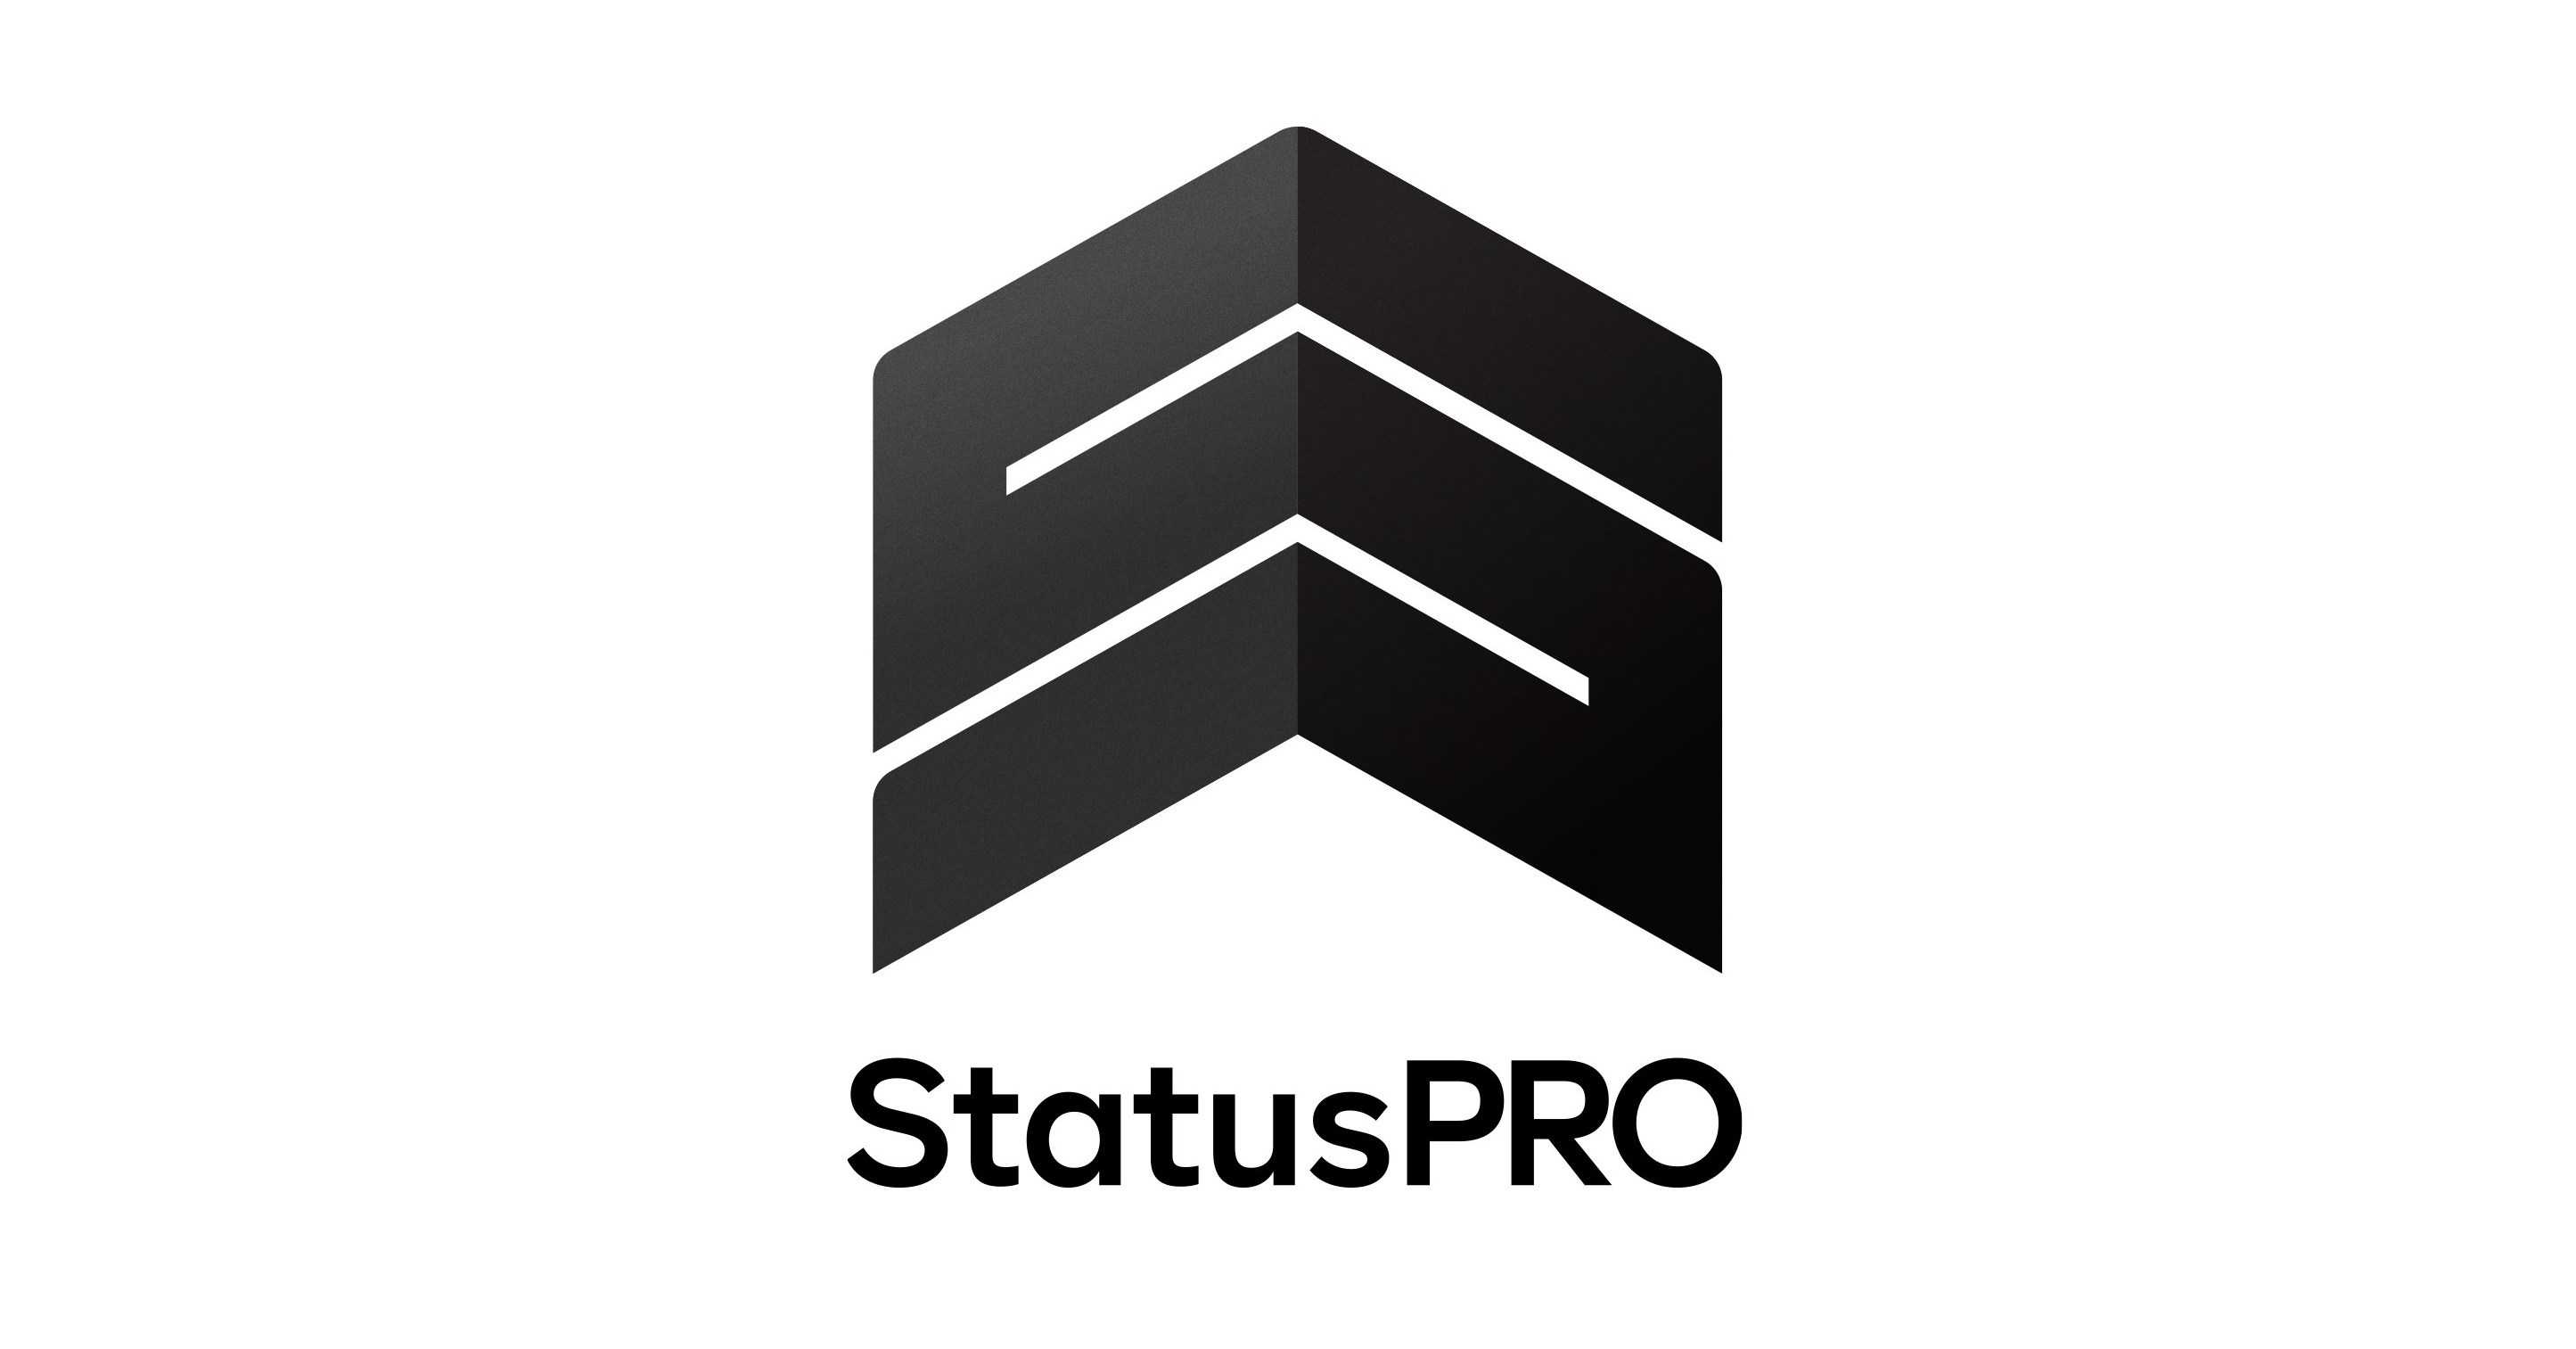 StatusPRO Aims To Set Sports Standard In XR With Investments From LeBron James, Naomi Osaka, Drake, Maverick Carter, Jimmy Iovine, Paul Wachter, And A Host Of Professional Athletes